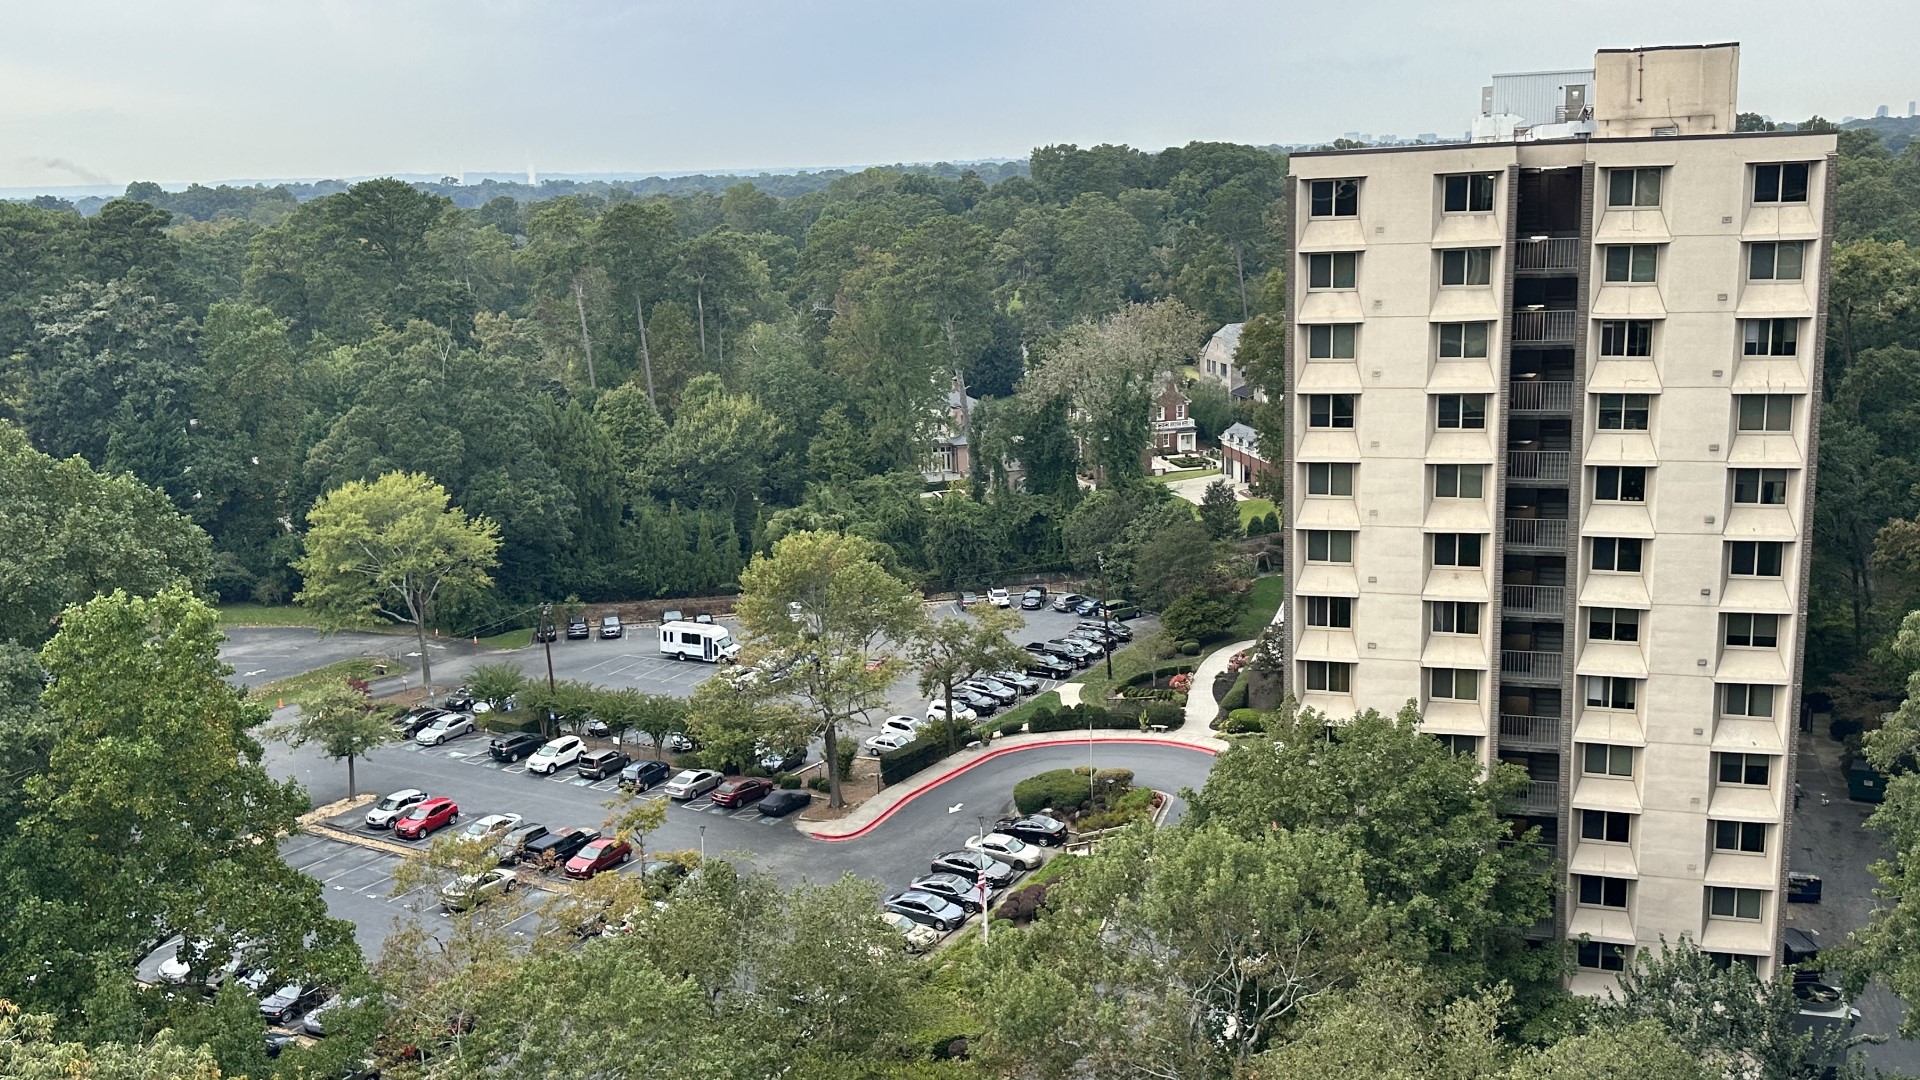 Residents living at Buckhead's Cathedral Towers off Peachtree Road are worried as the facility is possibly being taken over by a new operator.